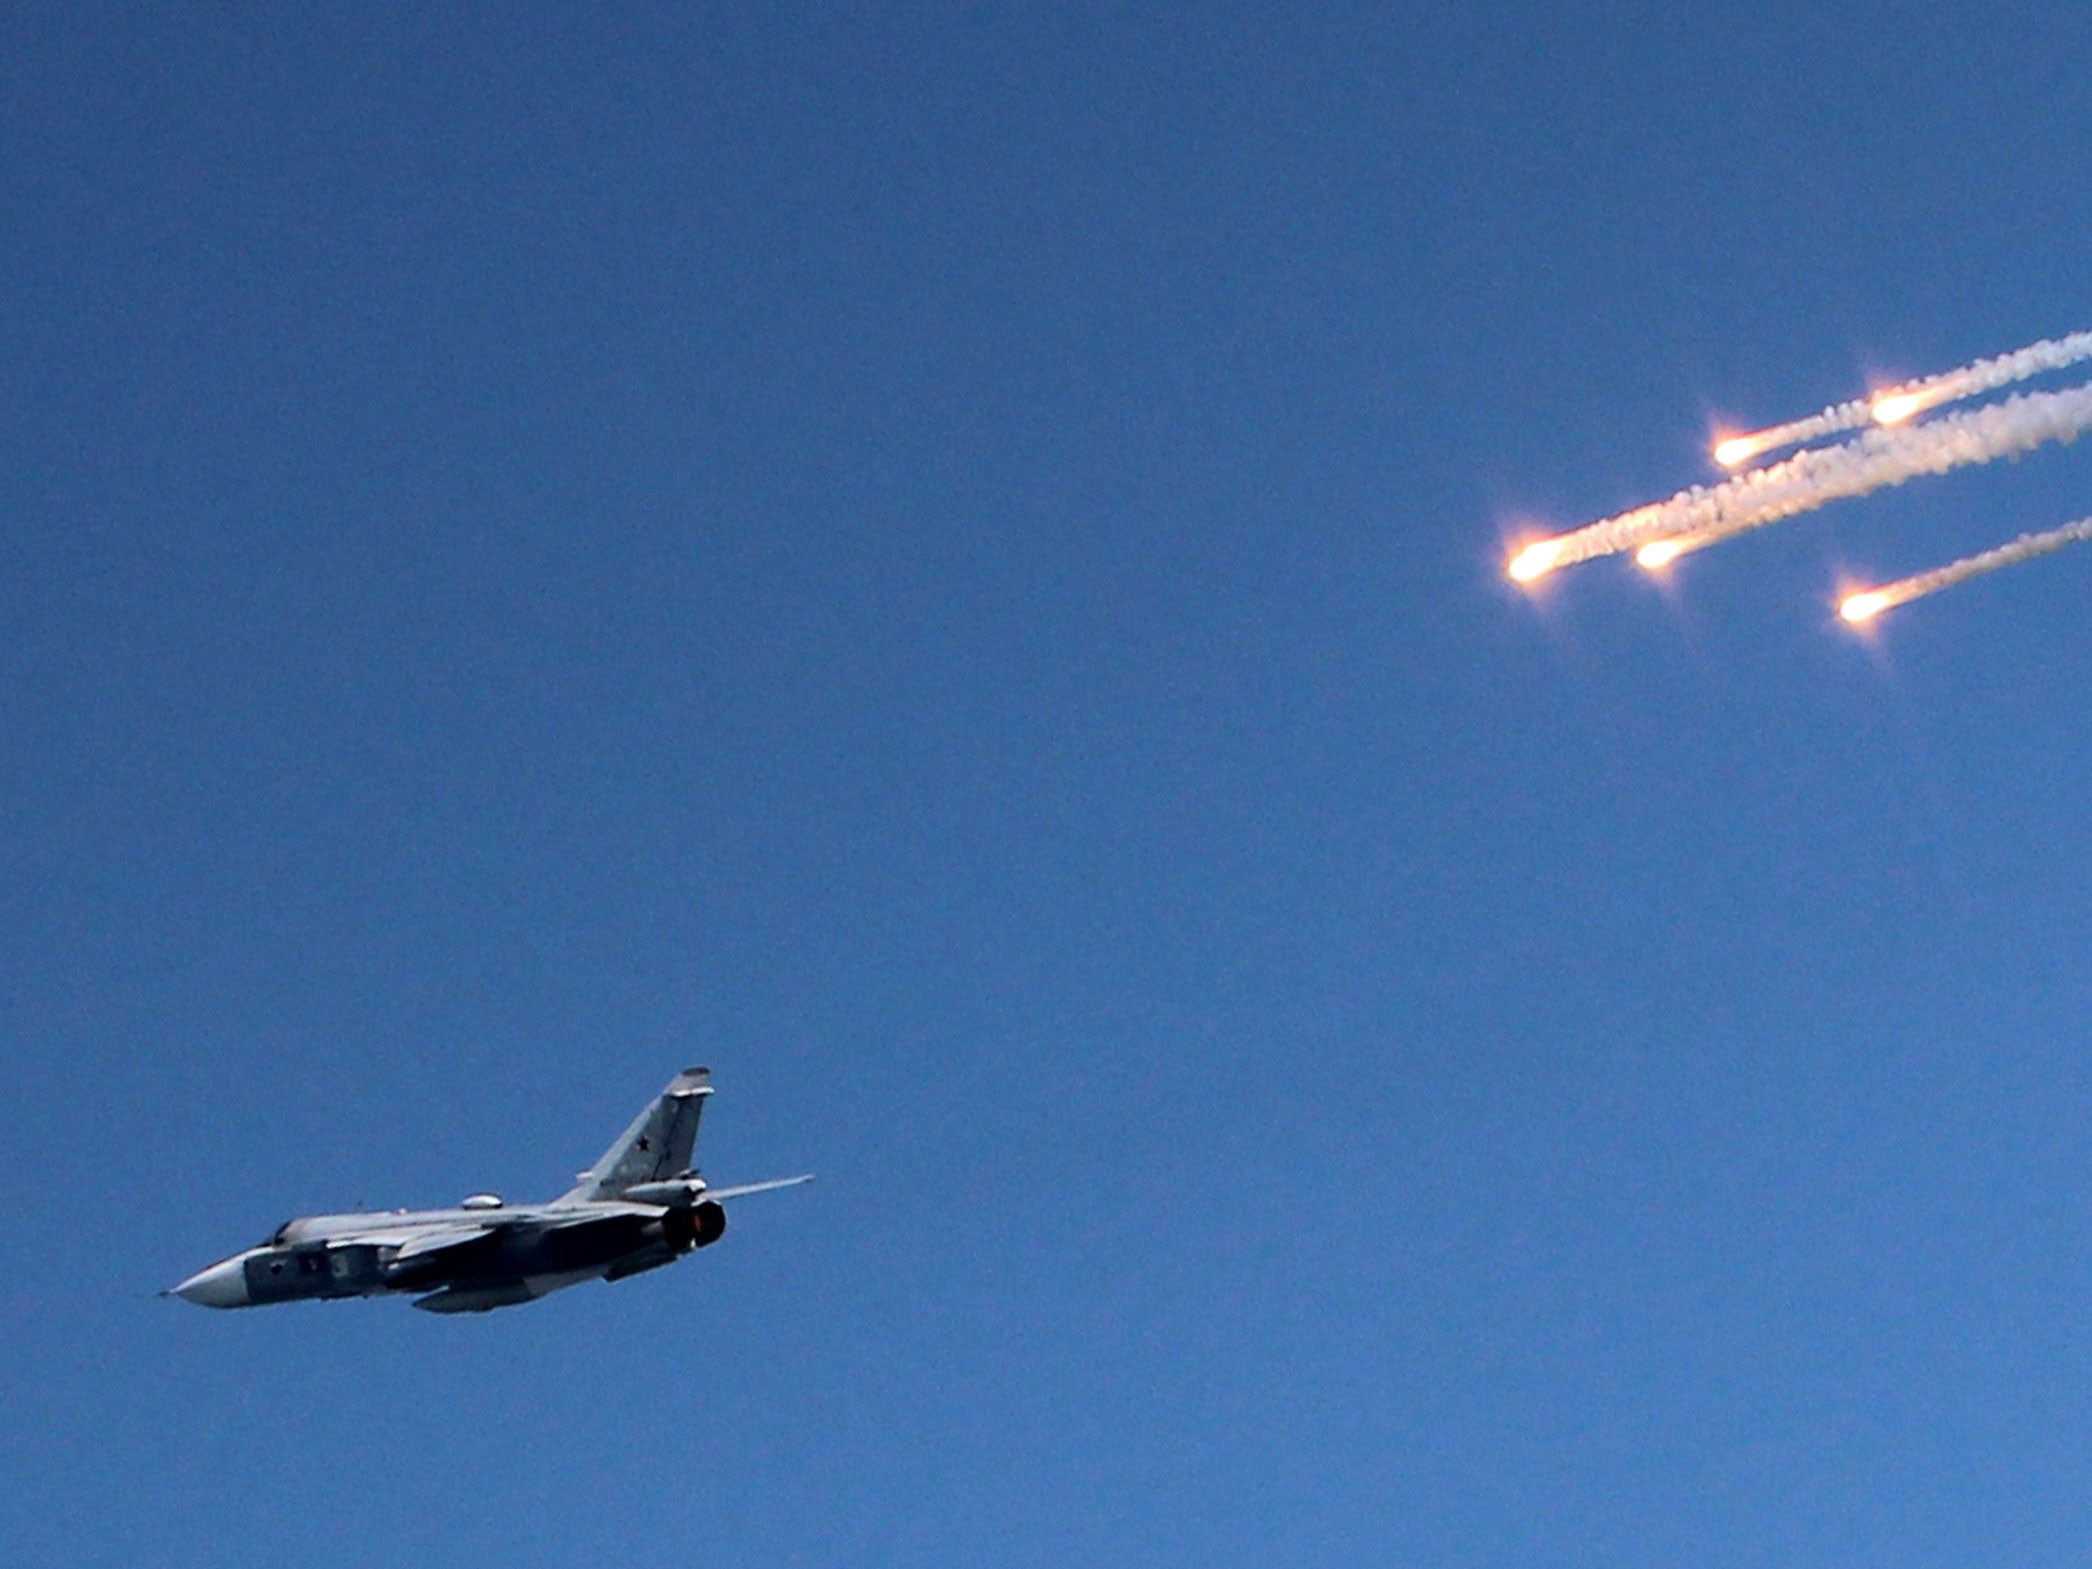 Two Russian fighter jets were intercepted off the coast of Alaska